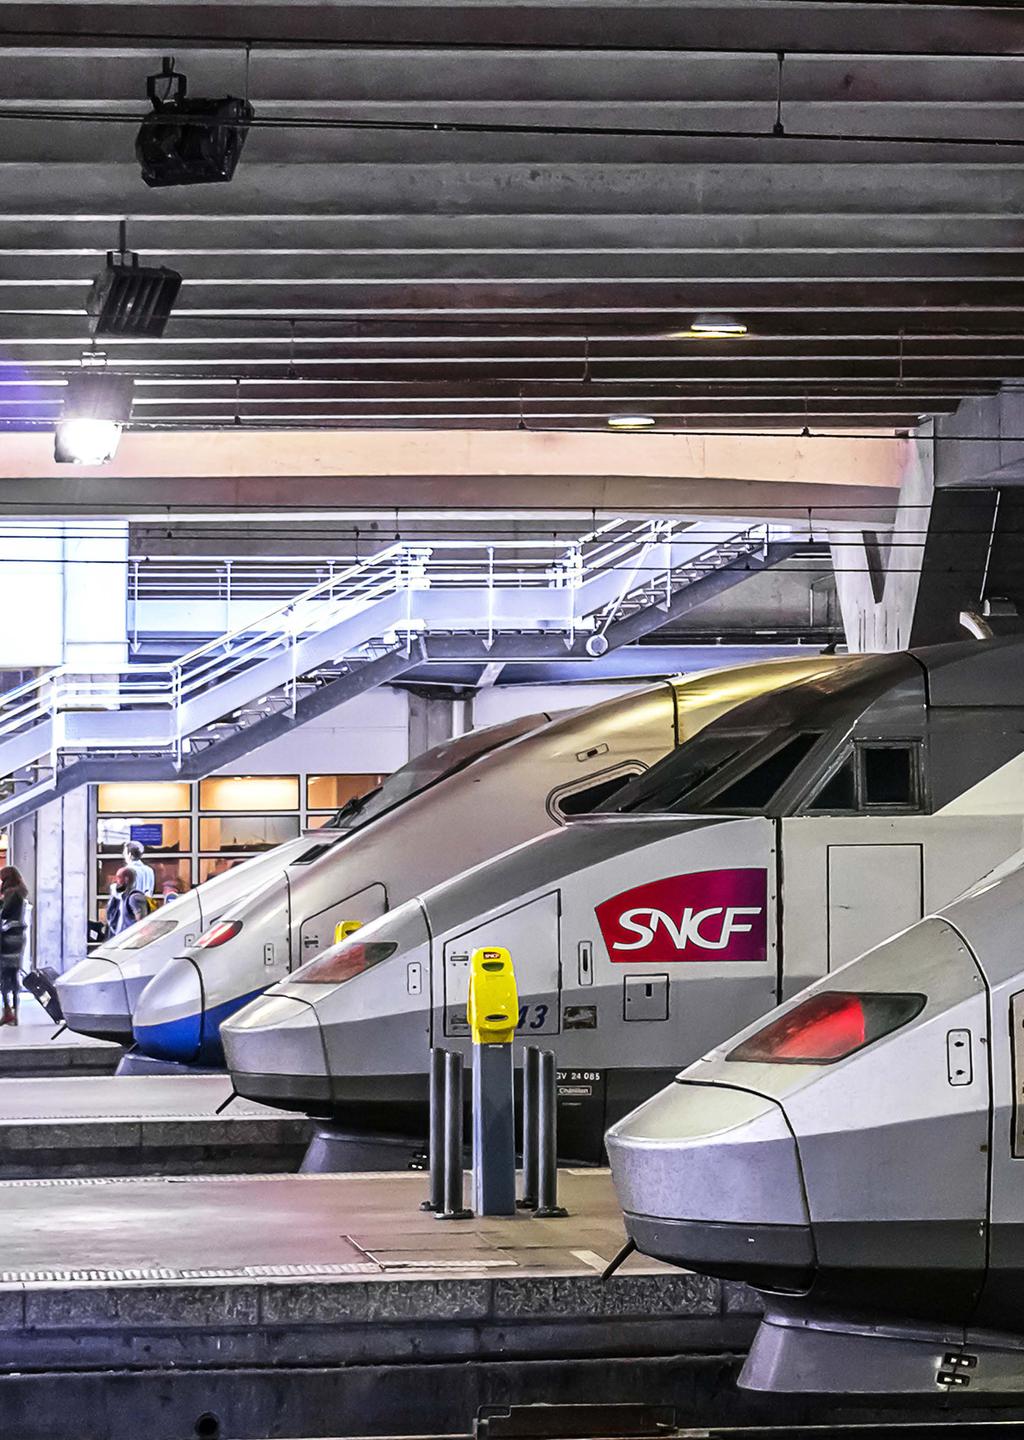 SNCF eliminates disruptions and delays on its